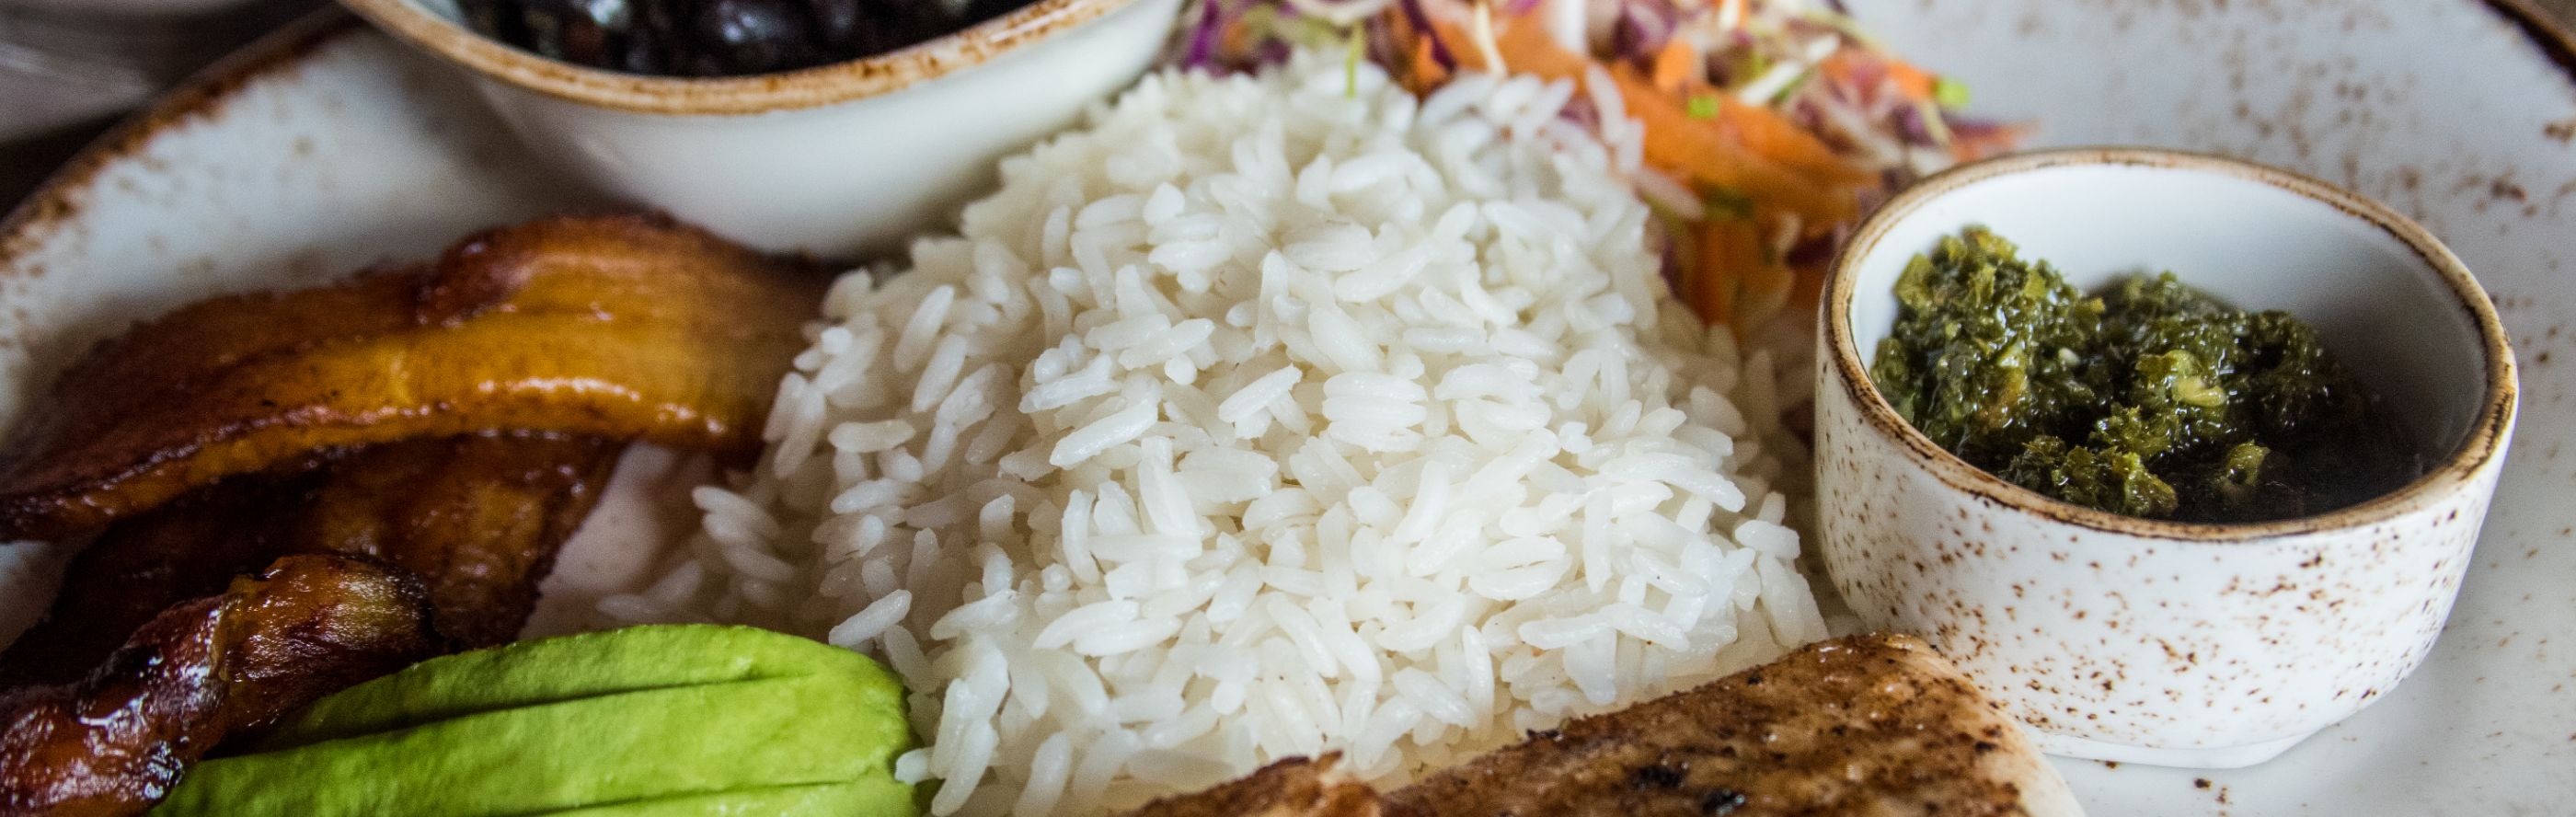 White rice on a place with sauces, vegetables and meat